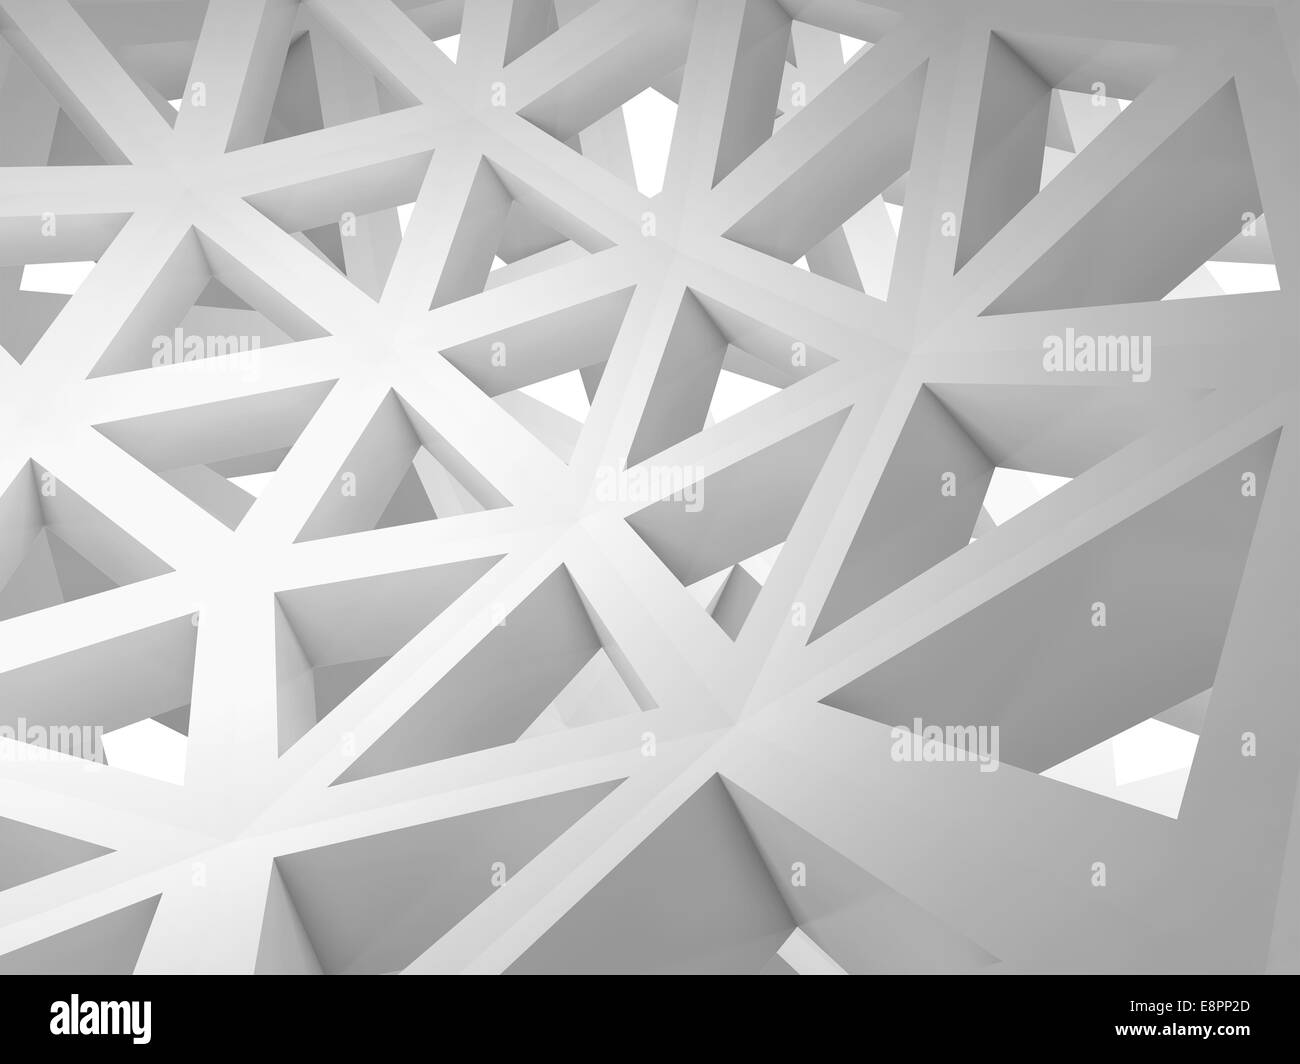 Abstract 3d background with white triangle wire construction Stock Photo